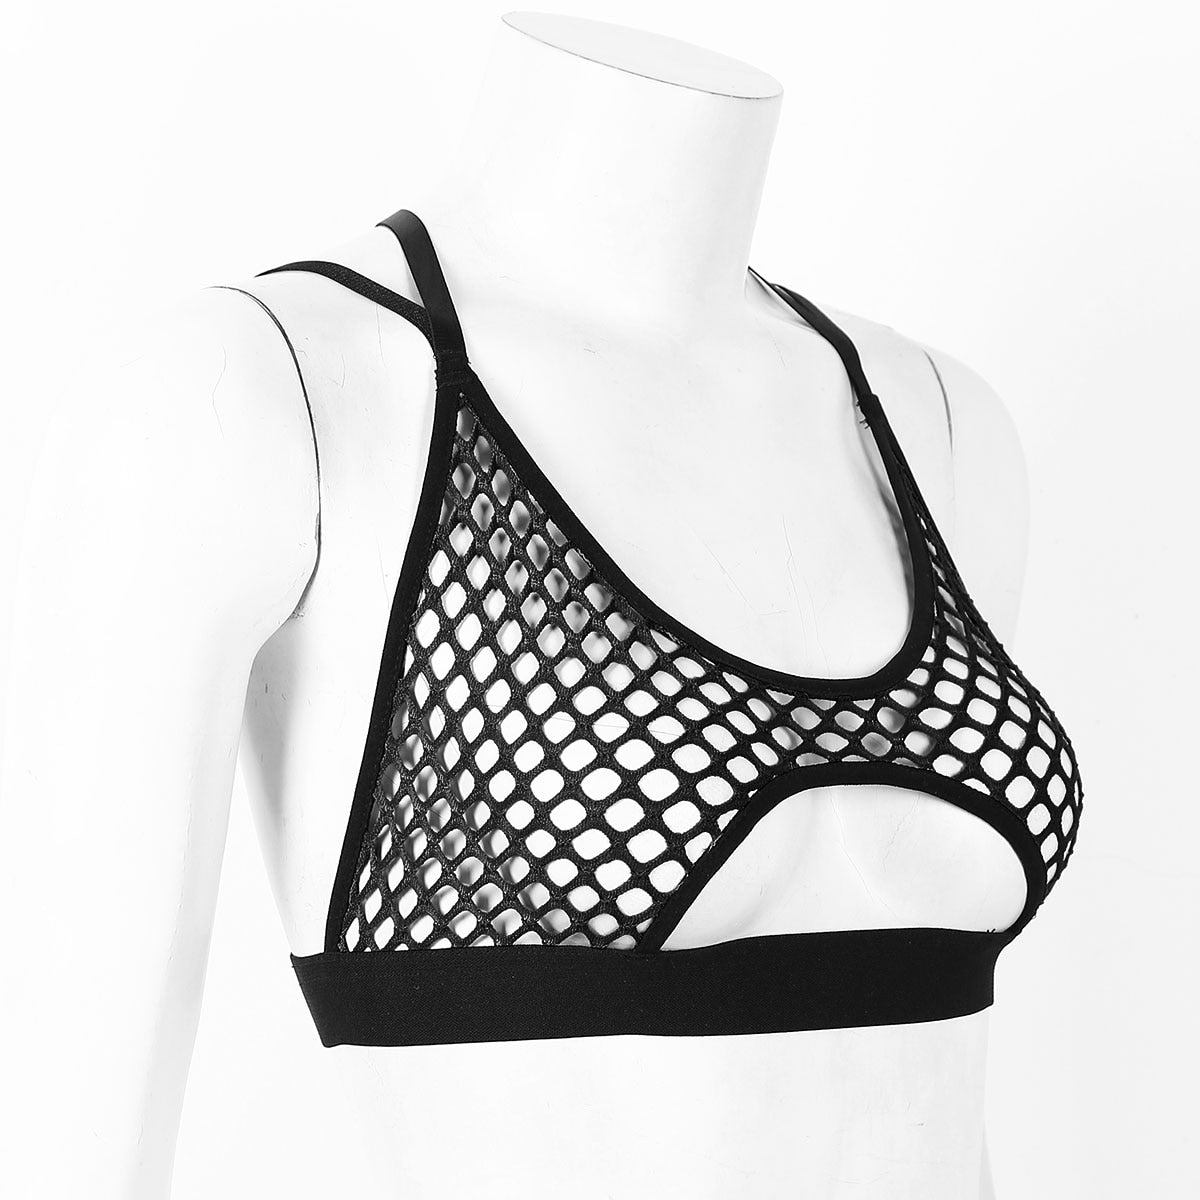 Rags n Rituals 'Unborn' Fishnet Top at $19.99 USD